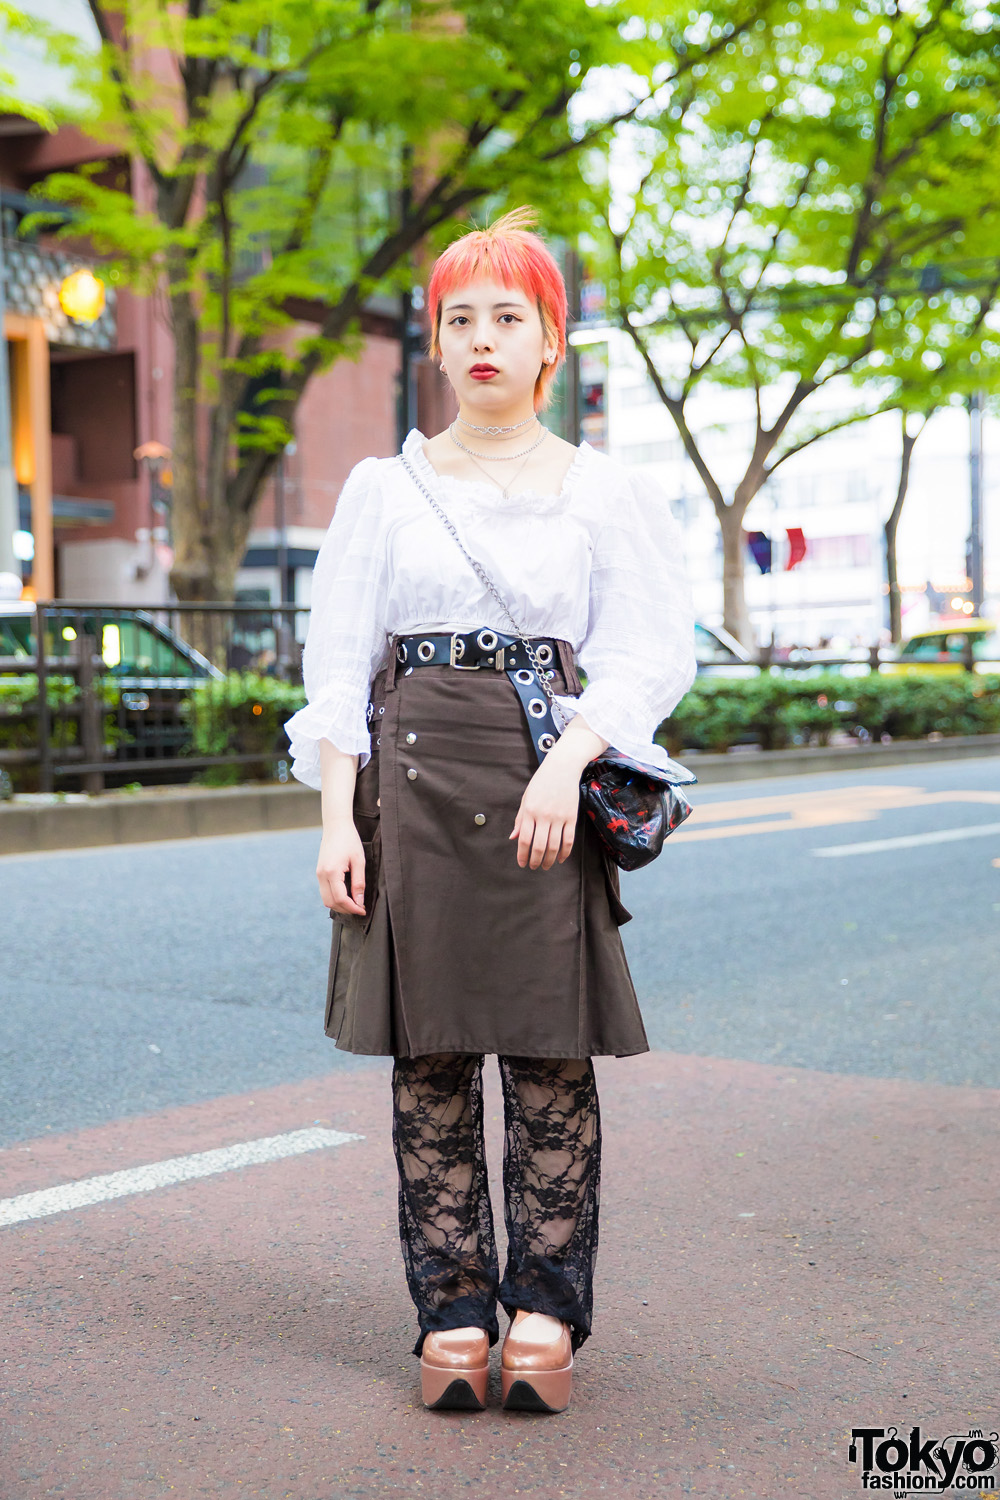 Pink-Haired Harajuku Girl in Faith Tokyo and Vivienne Westwood Tokyo Street Styles